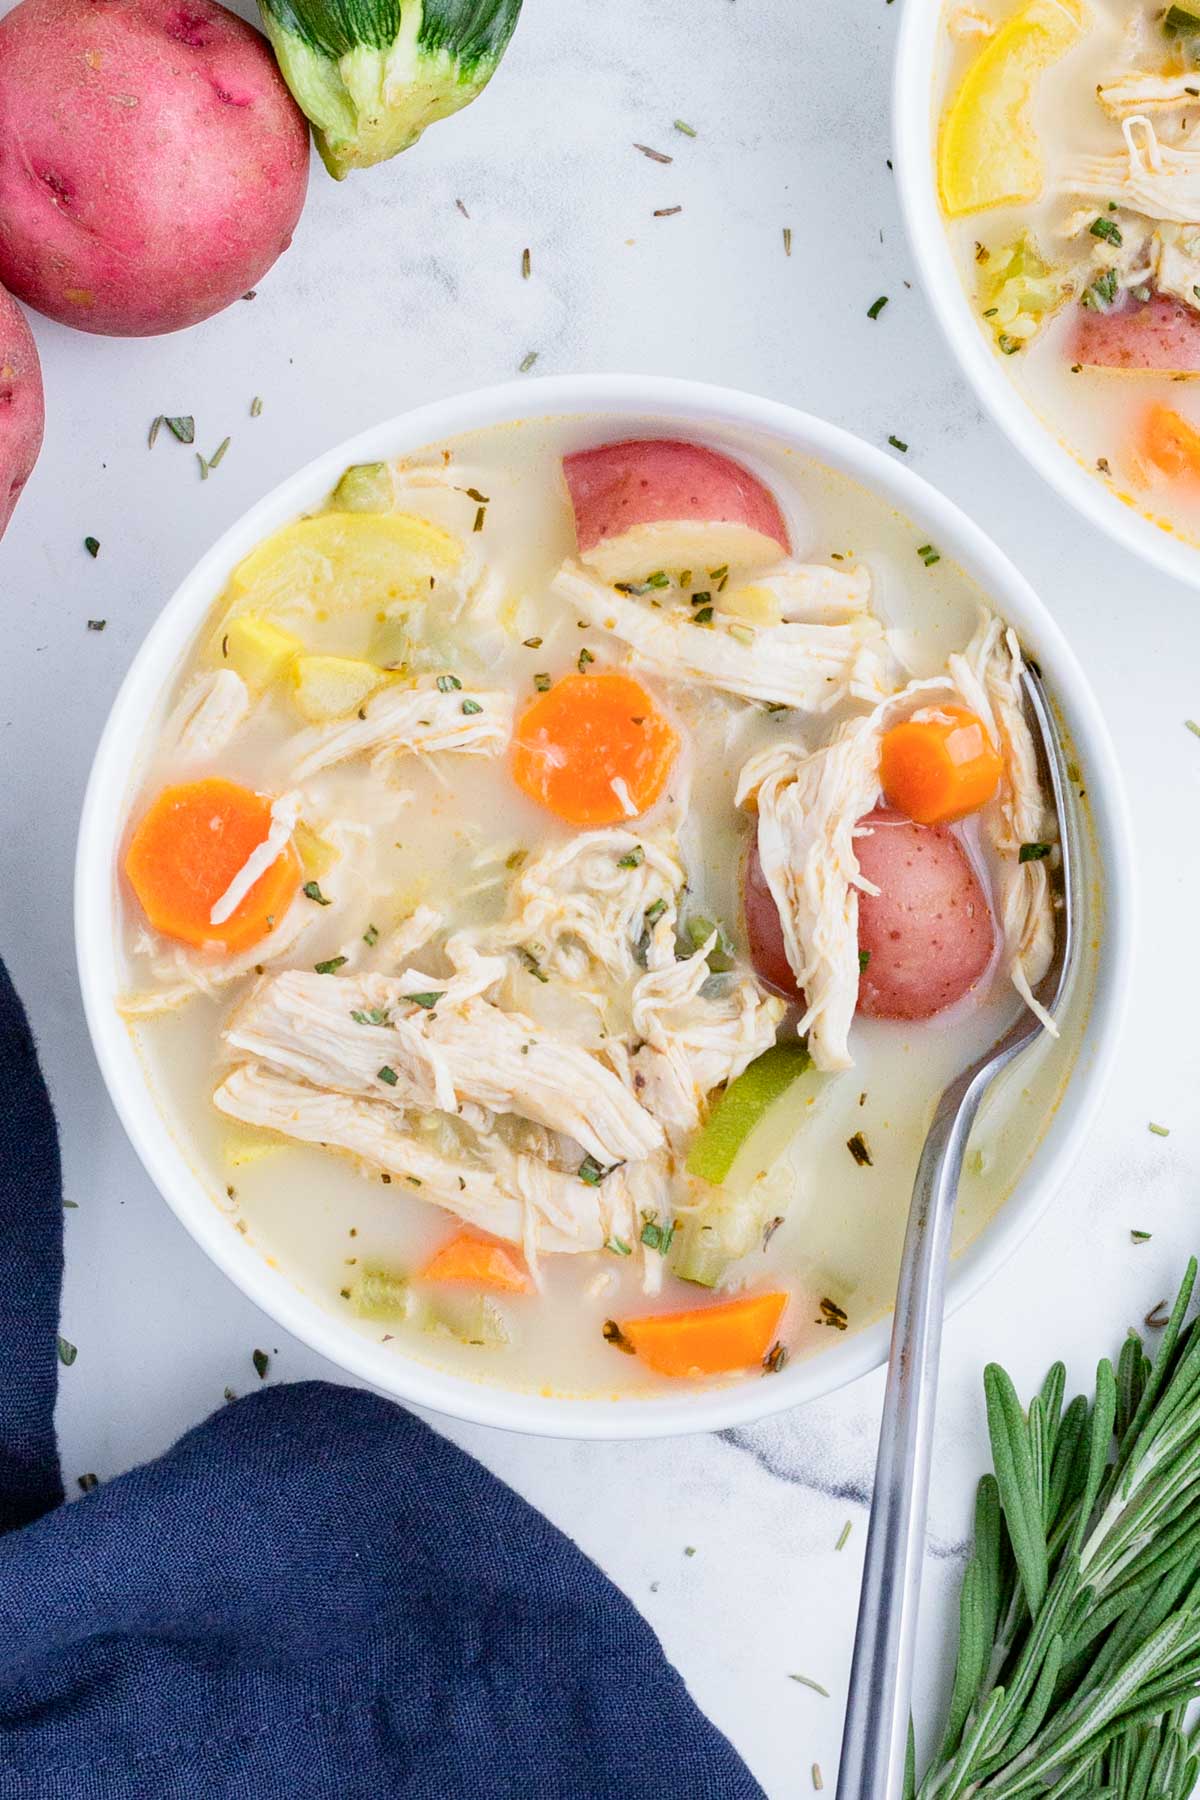 Best Chicken Vegetable Soup RECIPE served in a small, white bowl and a metal spoon.